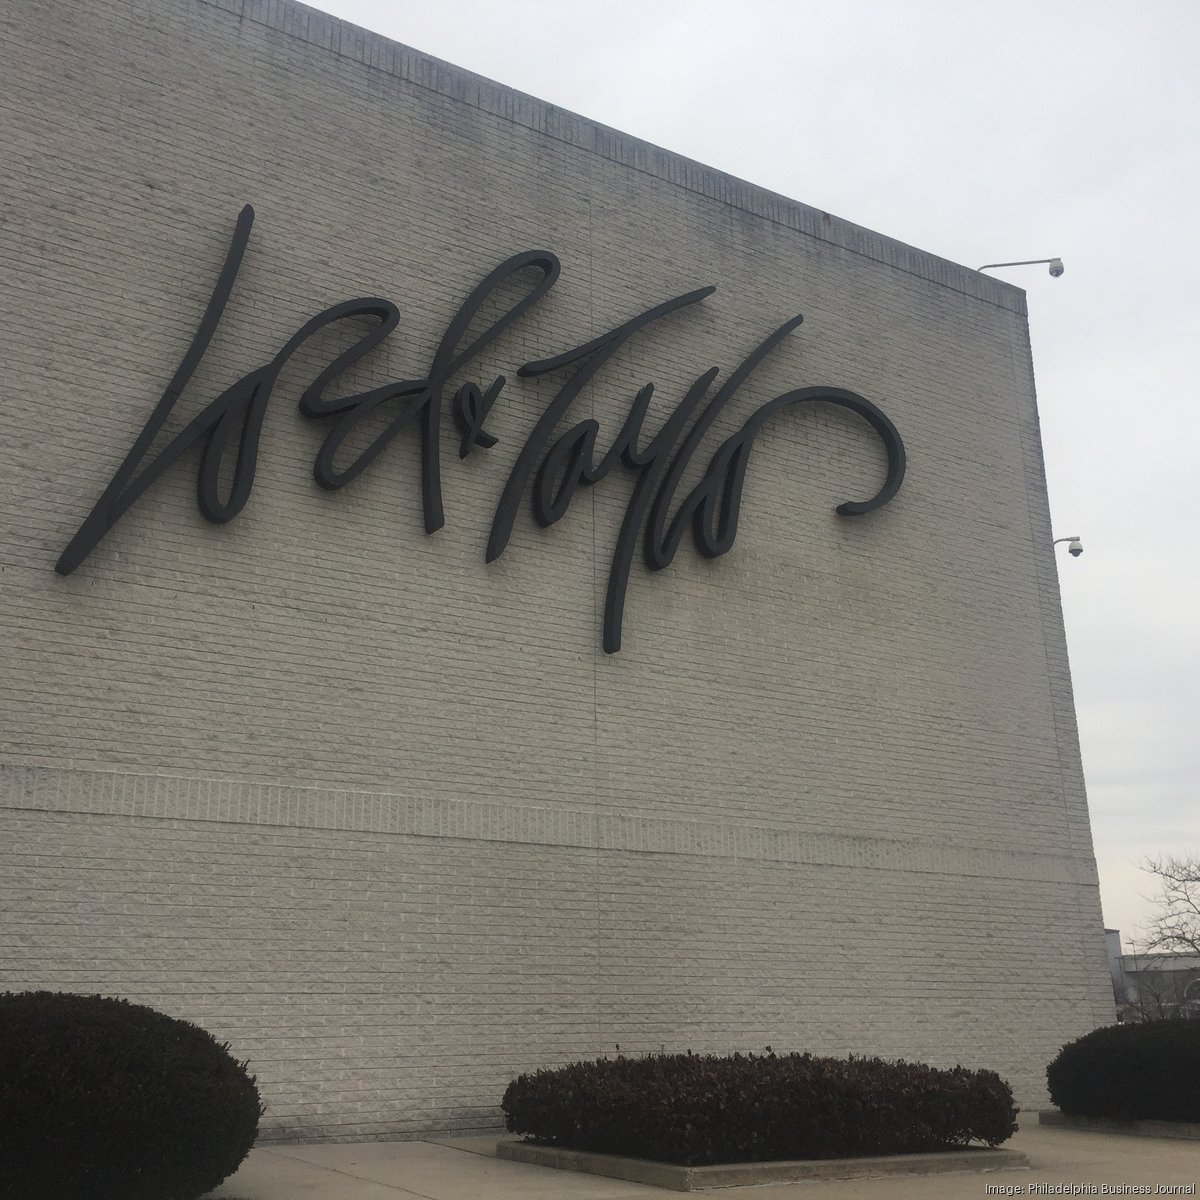 Lord & Taylor to lay off 81 at Moorestown Mall - Philadelphia